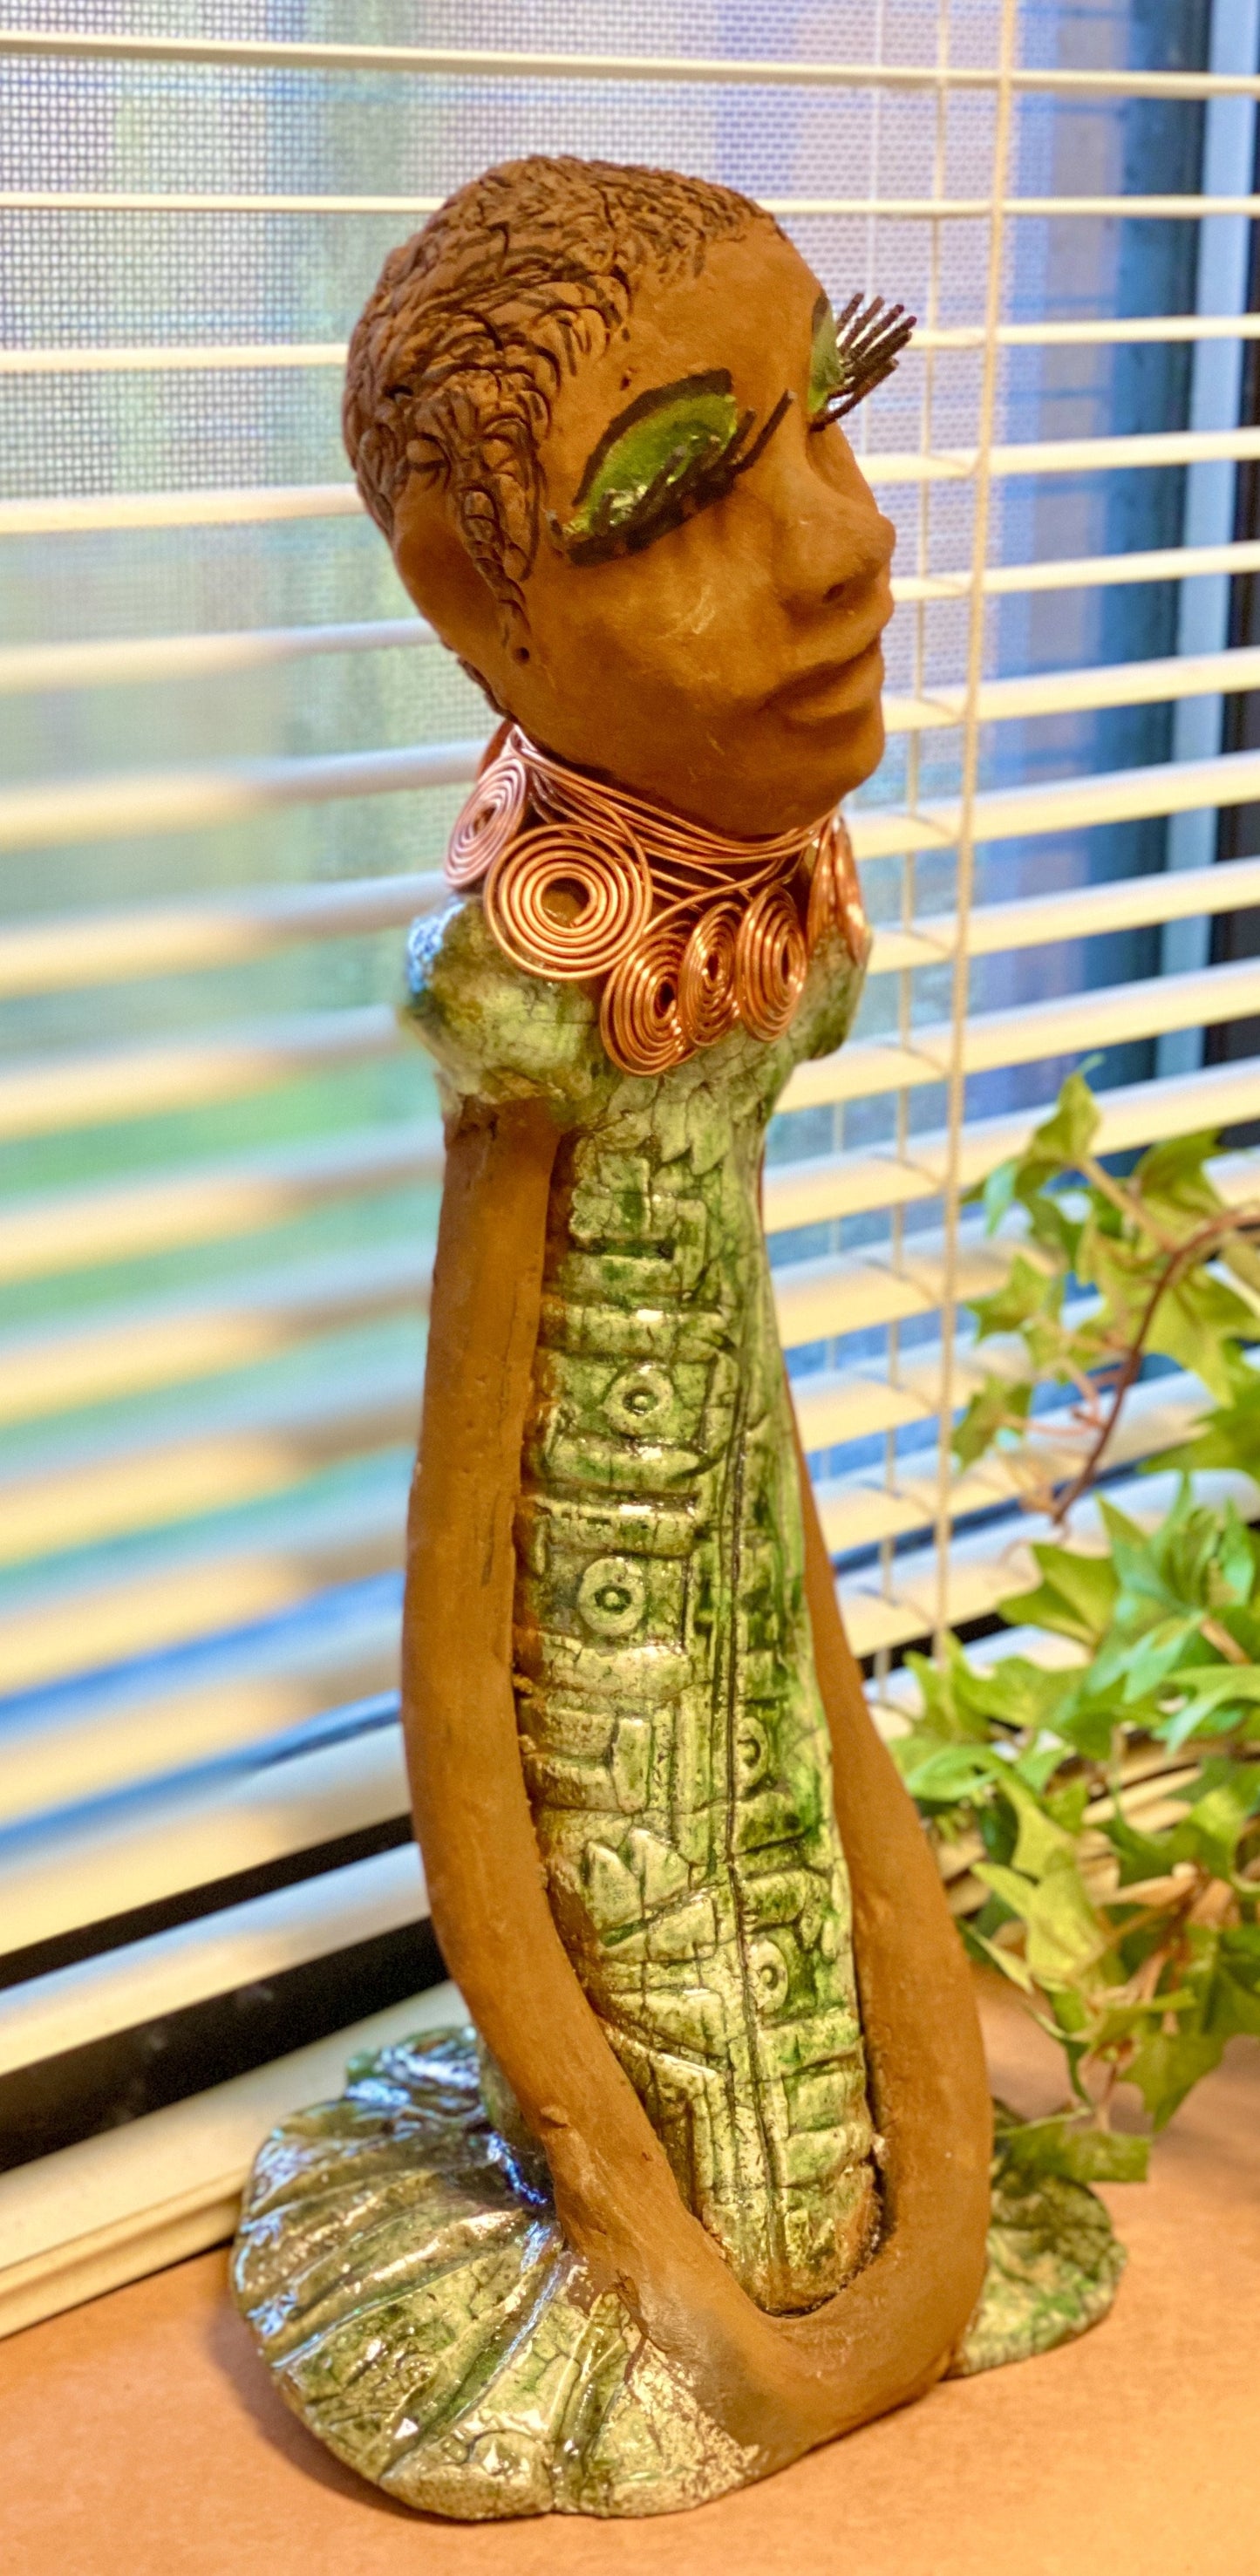 Gabrielle  stands 14" x 6" x 5.5" and weighs 2.15 lbs. She has a lovely honey brown complexion with green eye shadow. Her hairstyle is etched in clay with tribal markings.  Gabrielle  long loving arms rest beside her alligator green dress. She wears a spiral copper necklace. Gabrielle  is a sophisticated lady that will grace your home.